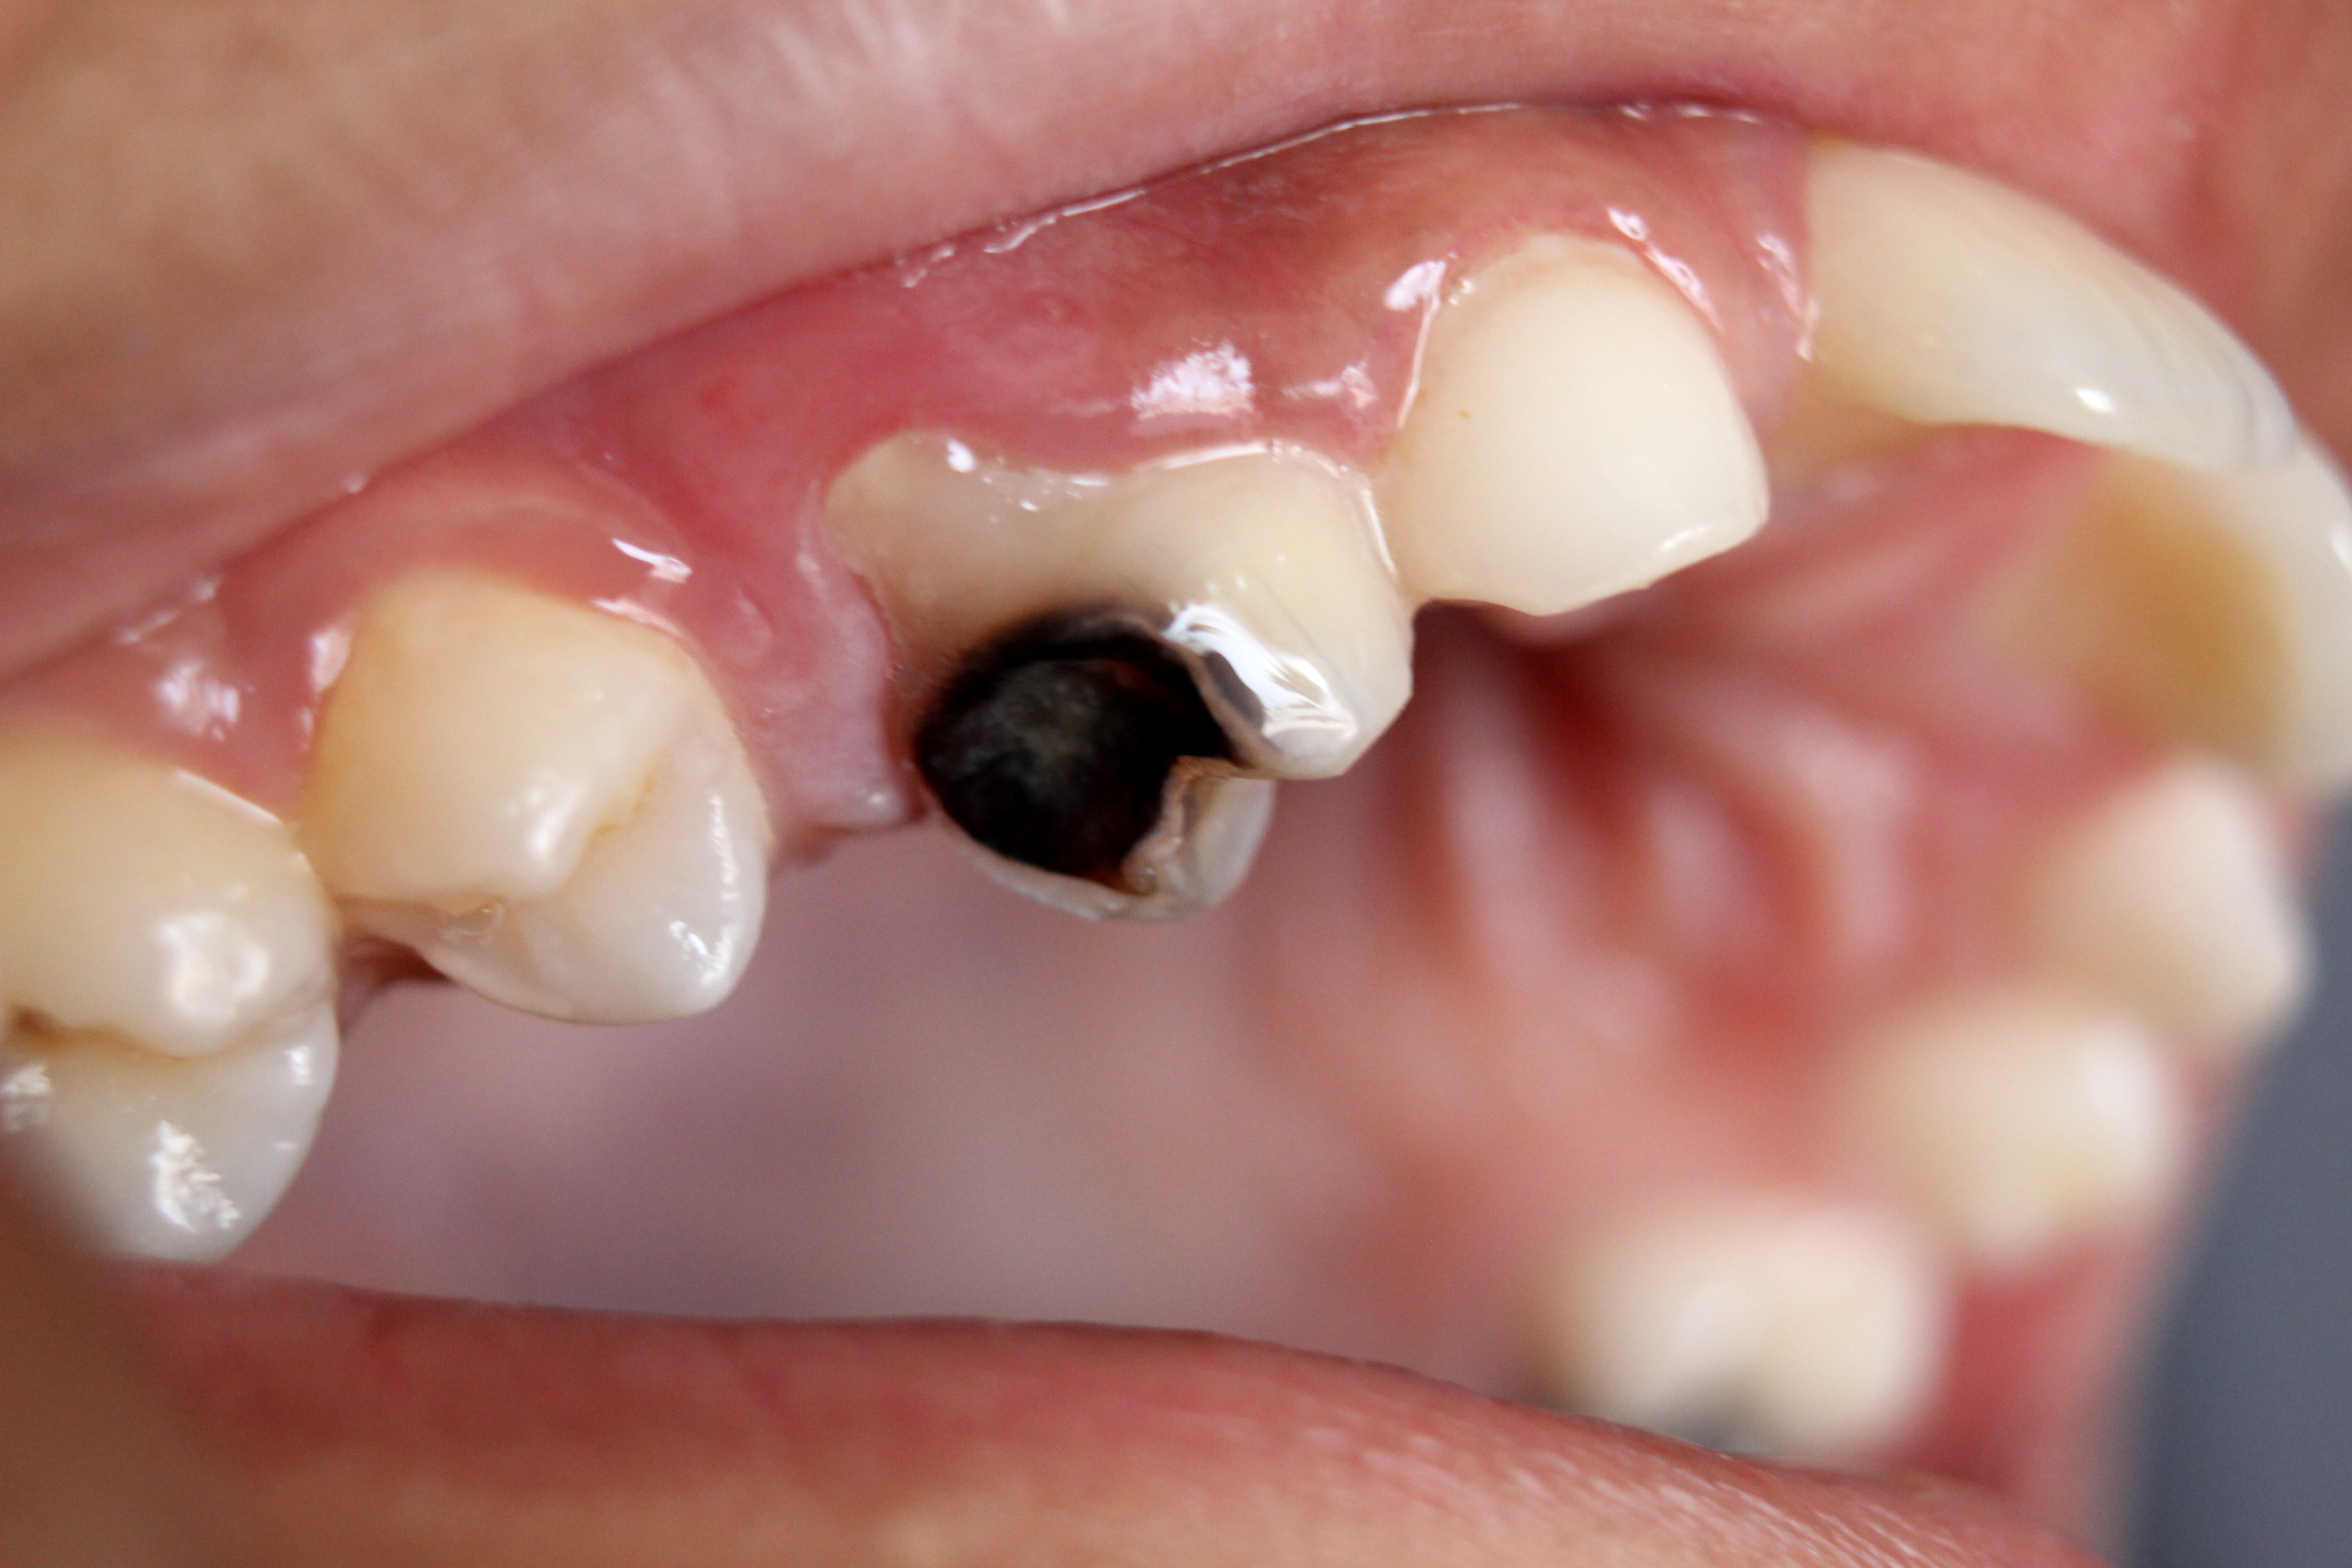 WHAT YOU NEED TO KNOW ABOUT DENTAL CARIES.